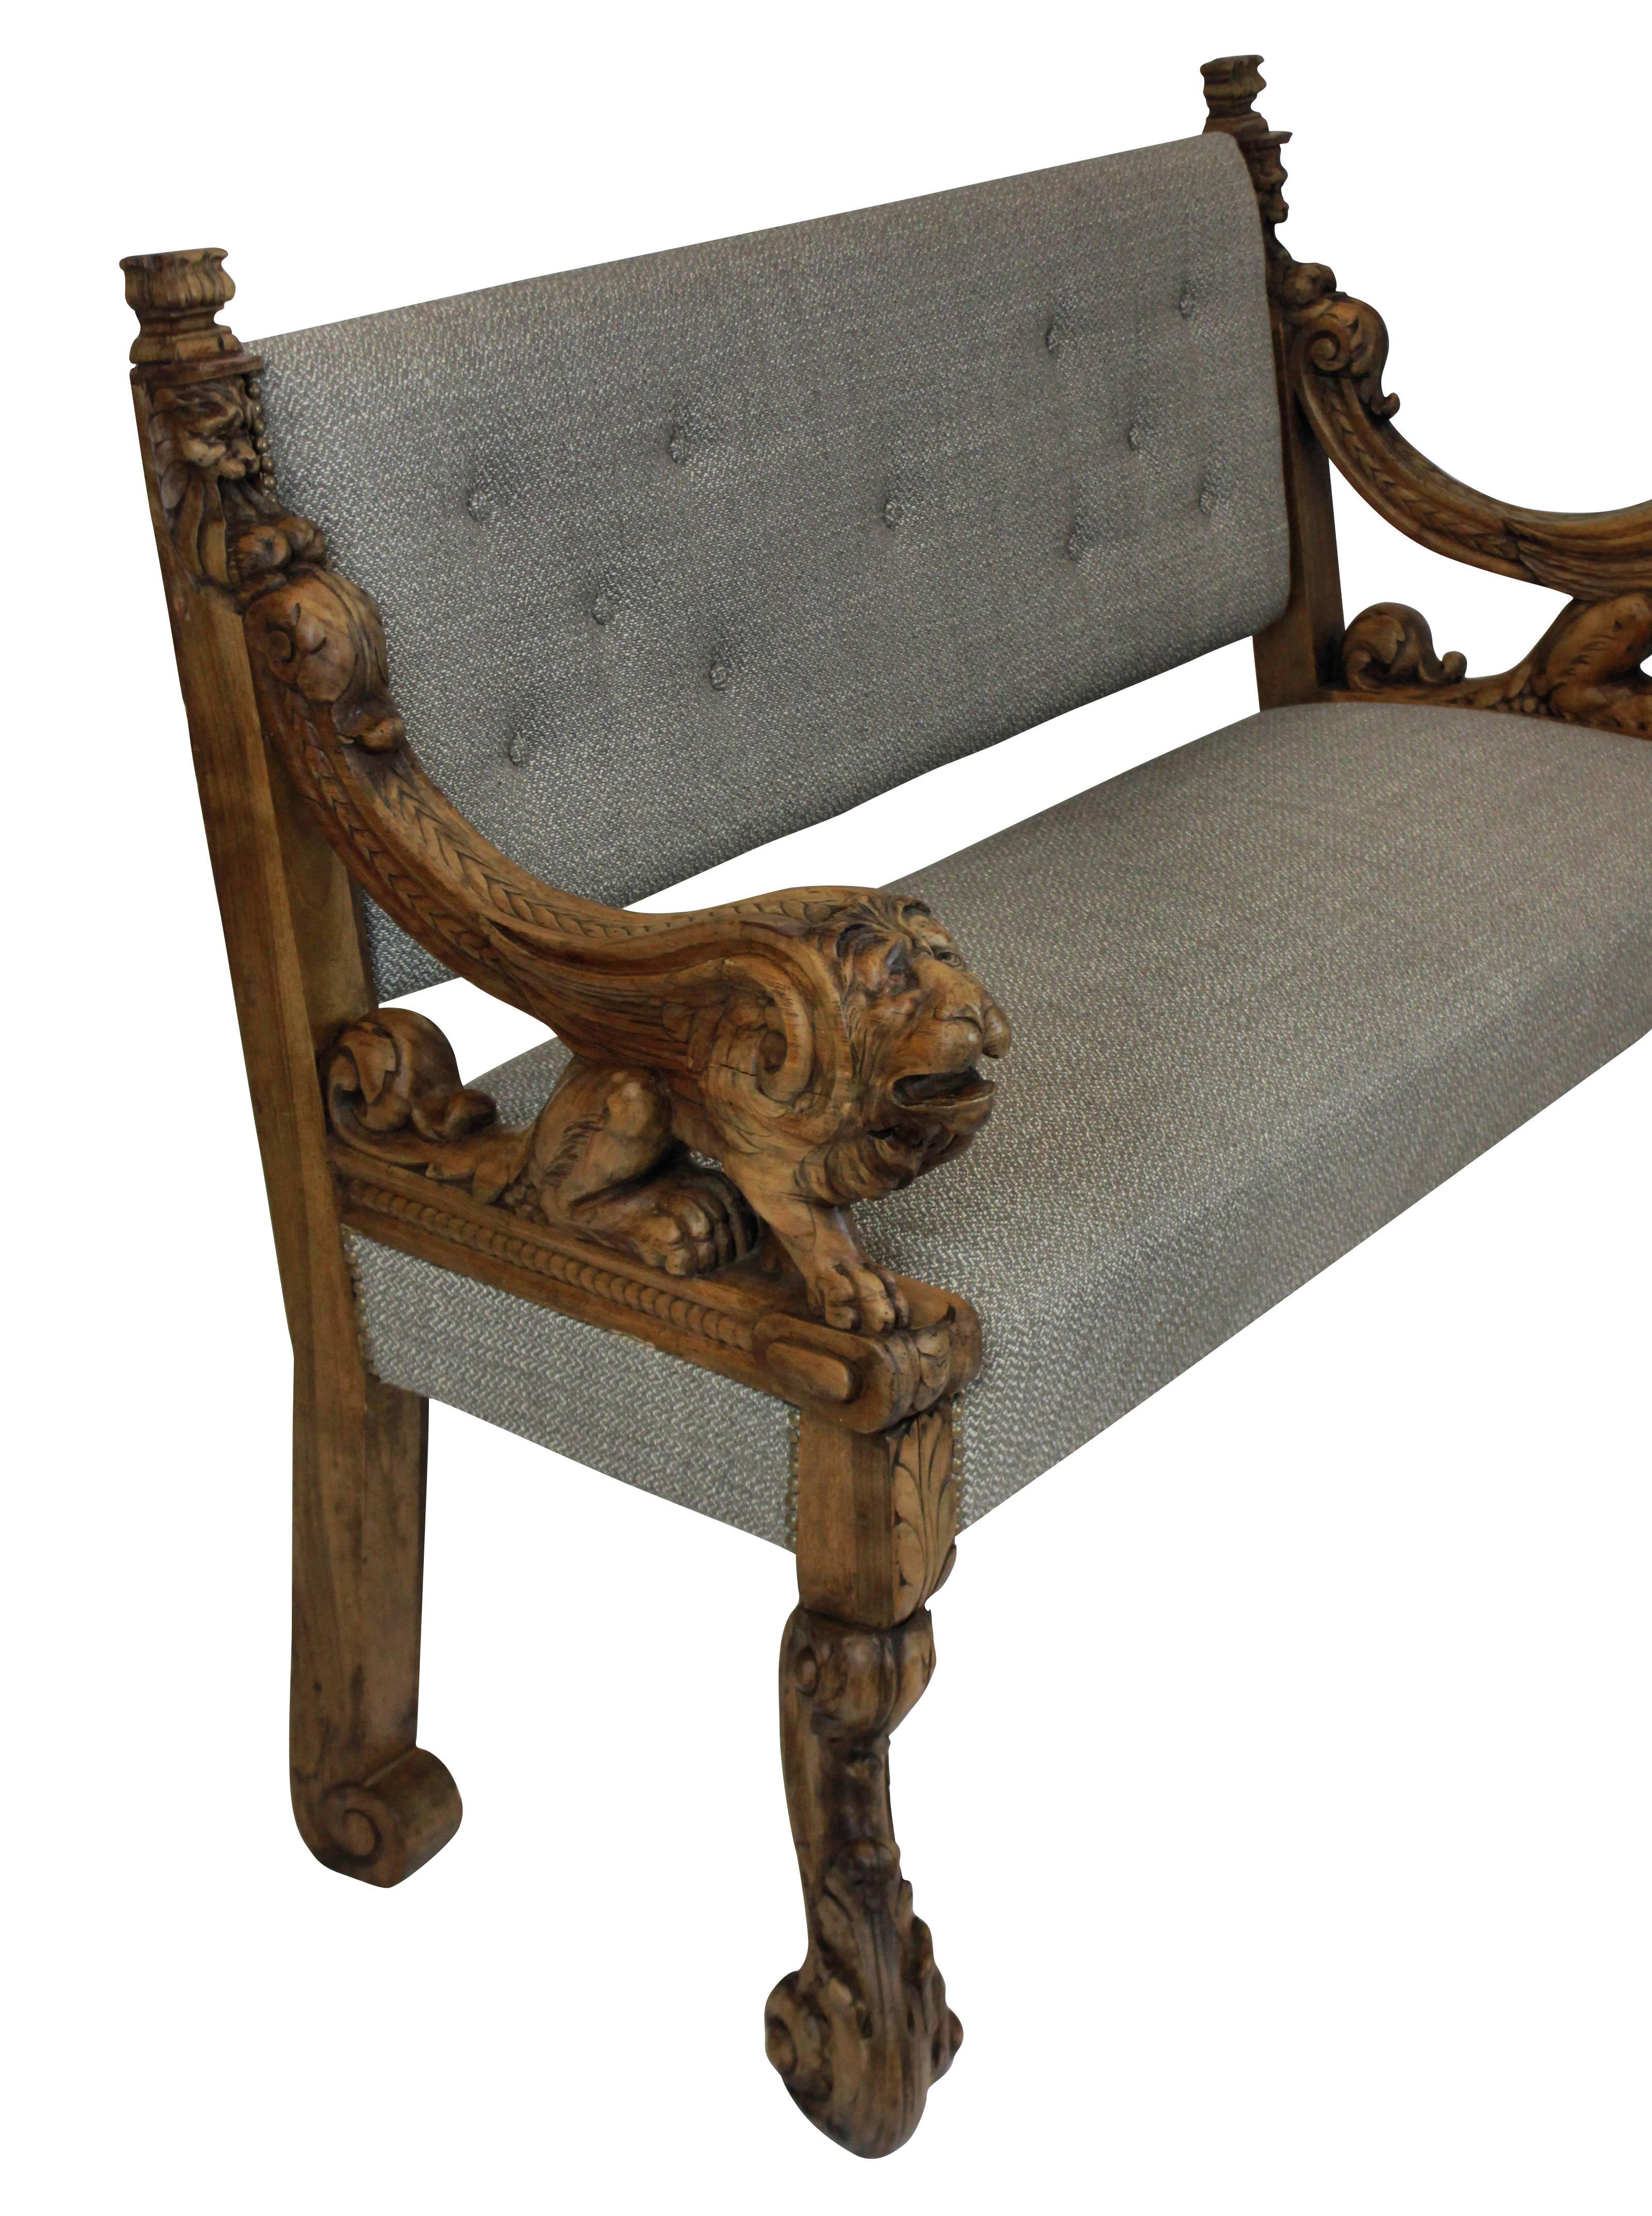 An 18th century Venetian beautifully carved walnut settee. The arms depicting the winged lion of Saint Mark. Newly upholstered in Colefax & Fowler fabric.
 